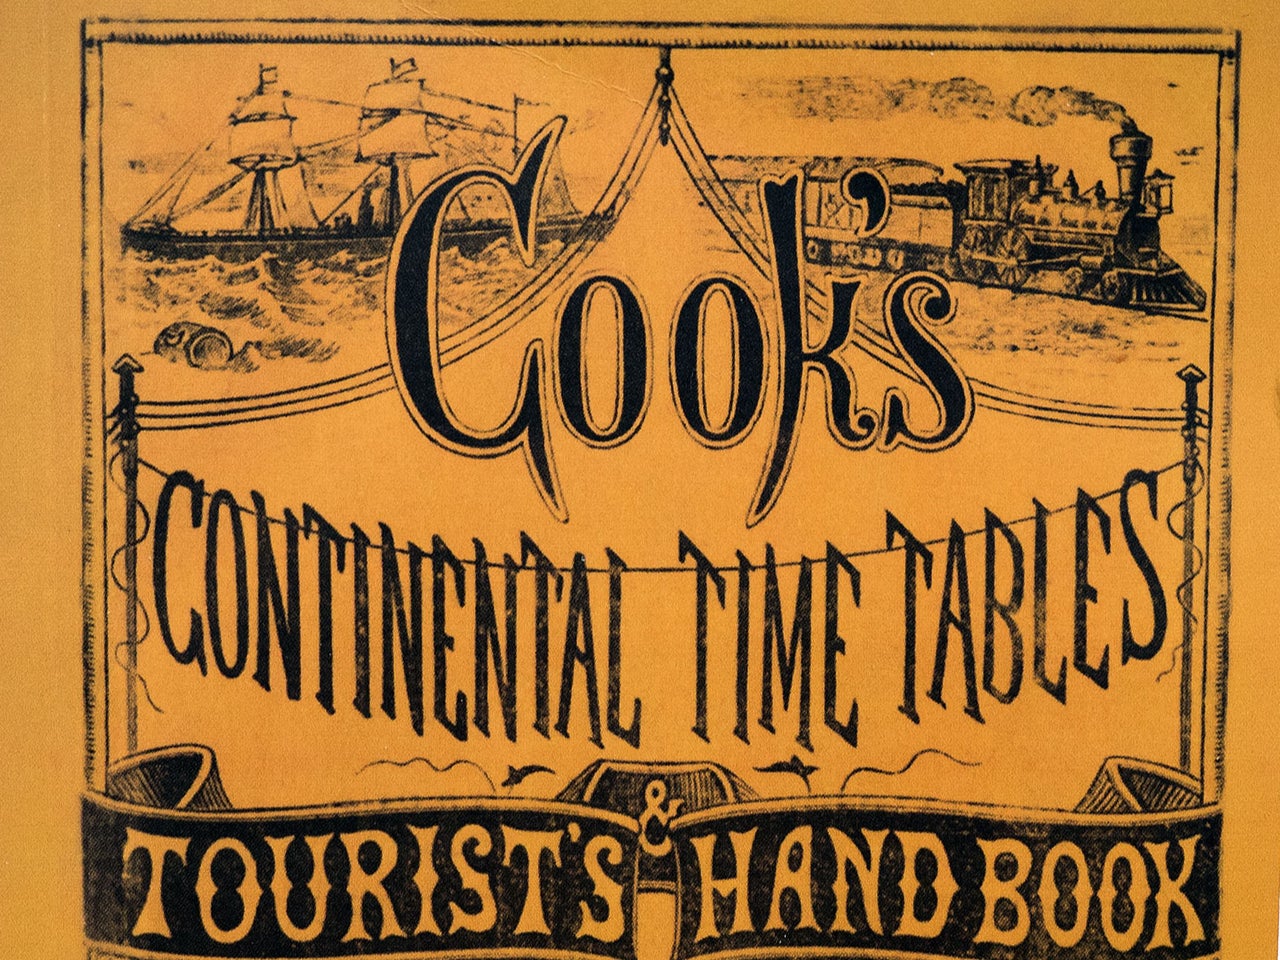 Backpackers’ Bible: the cover of the first edition of Cook’s Continental Time Tables